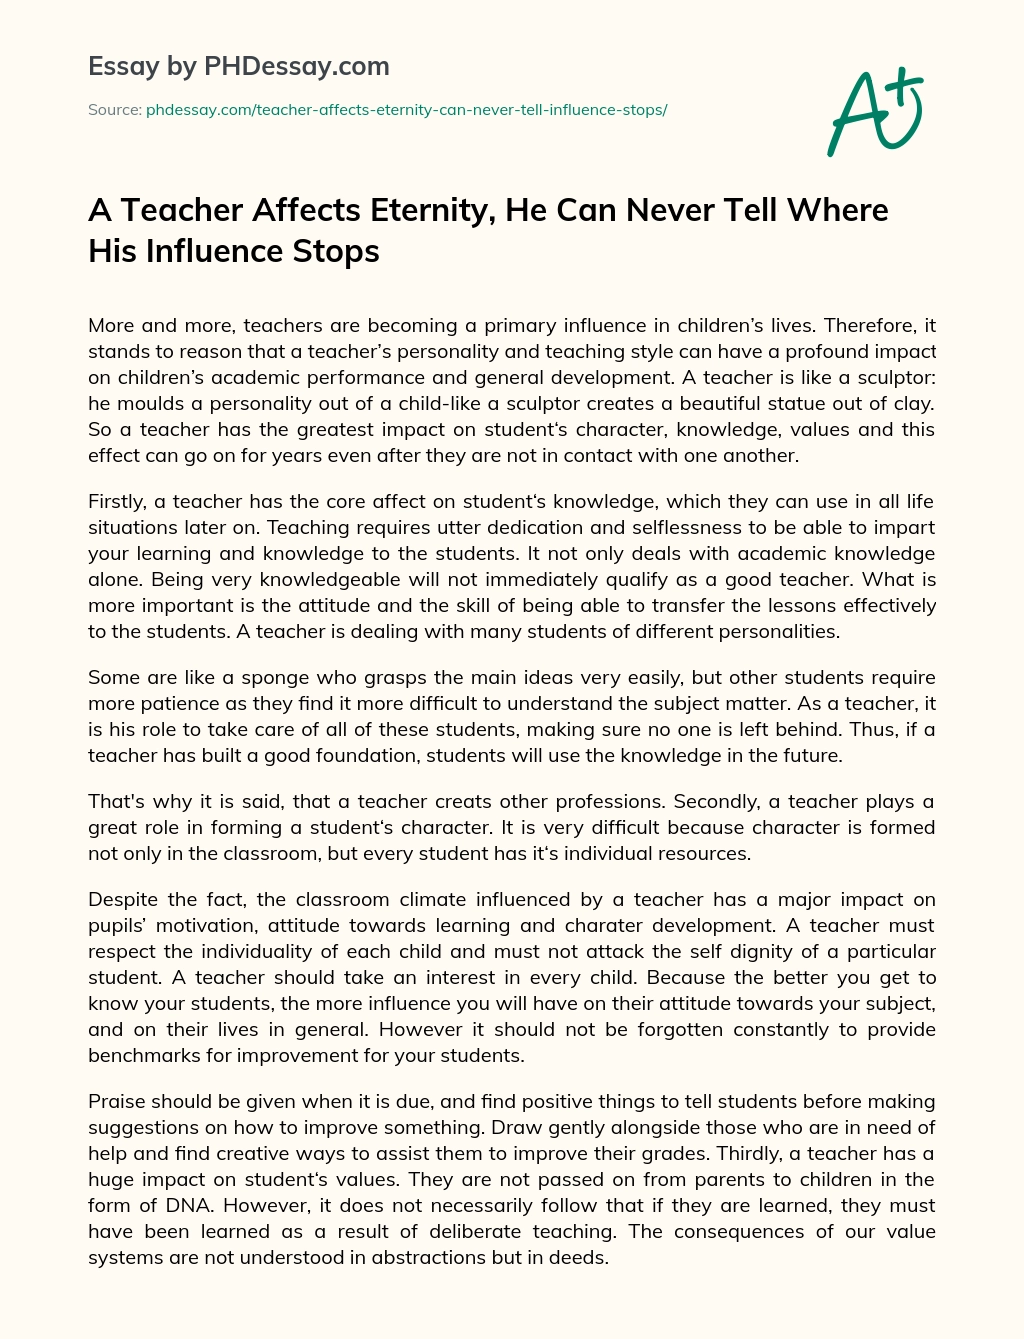 A Teacher Affects Eternity, He Can Never Tell Where His Influence Stops essay